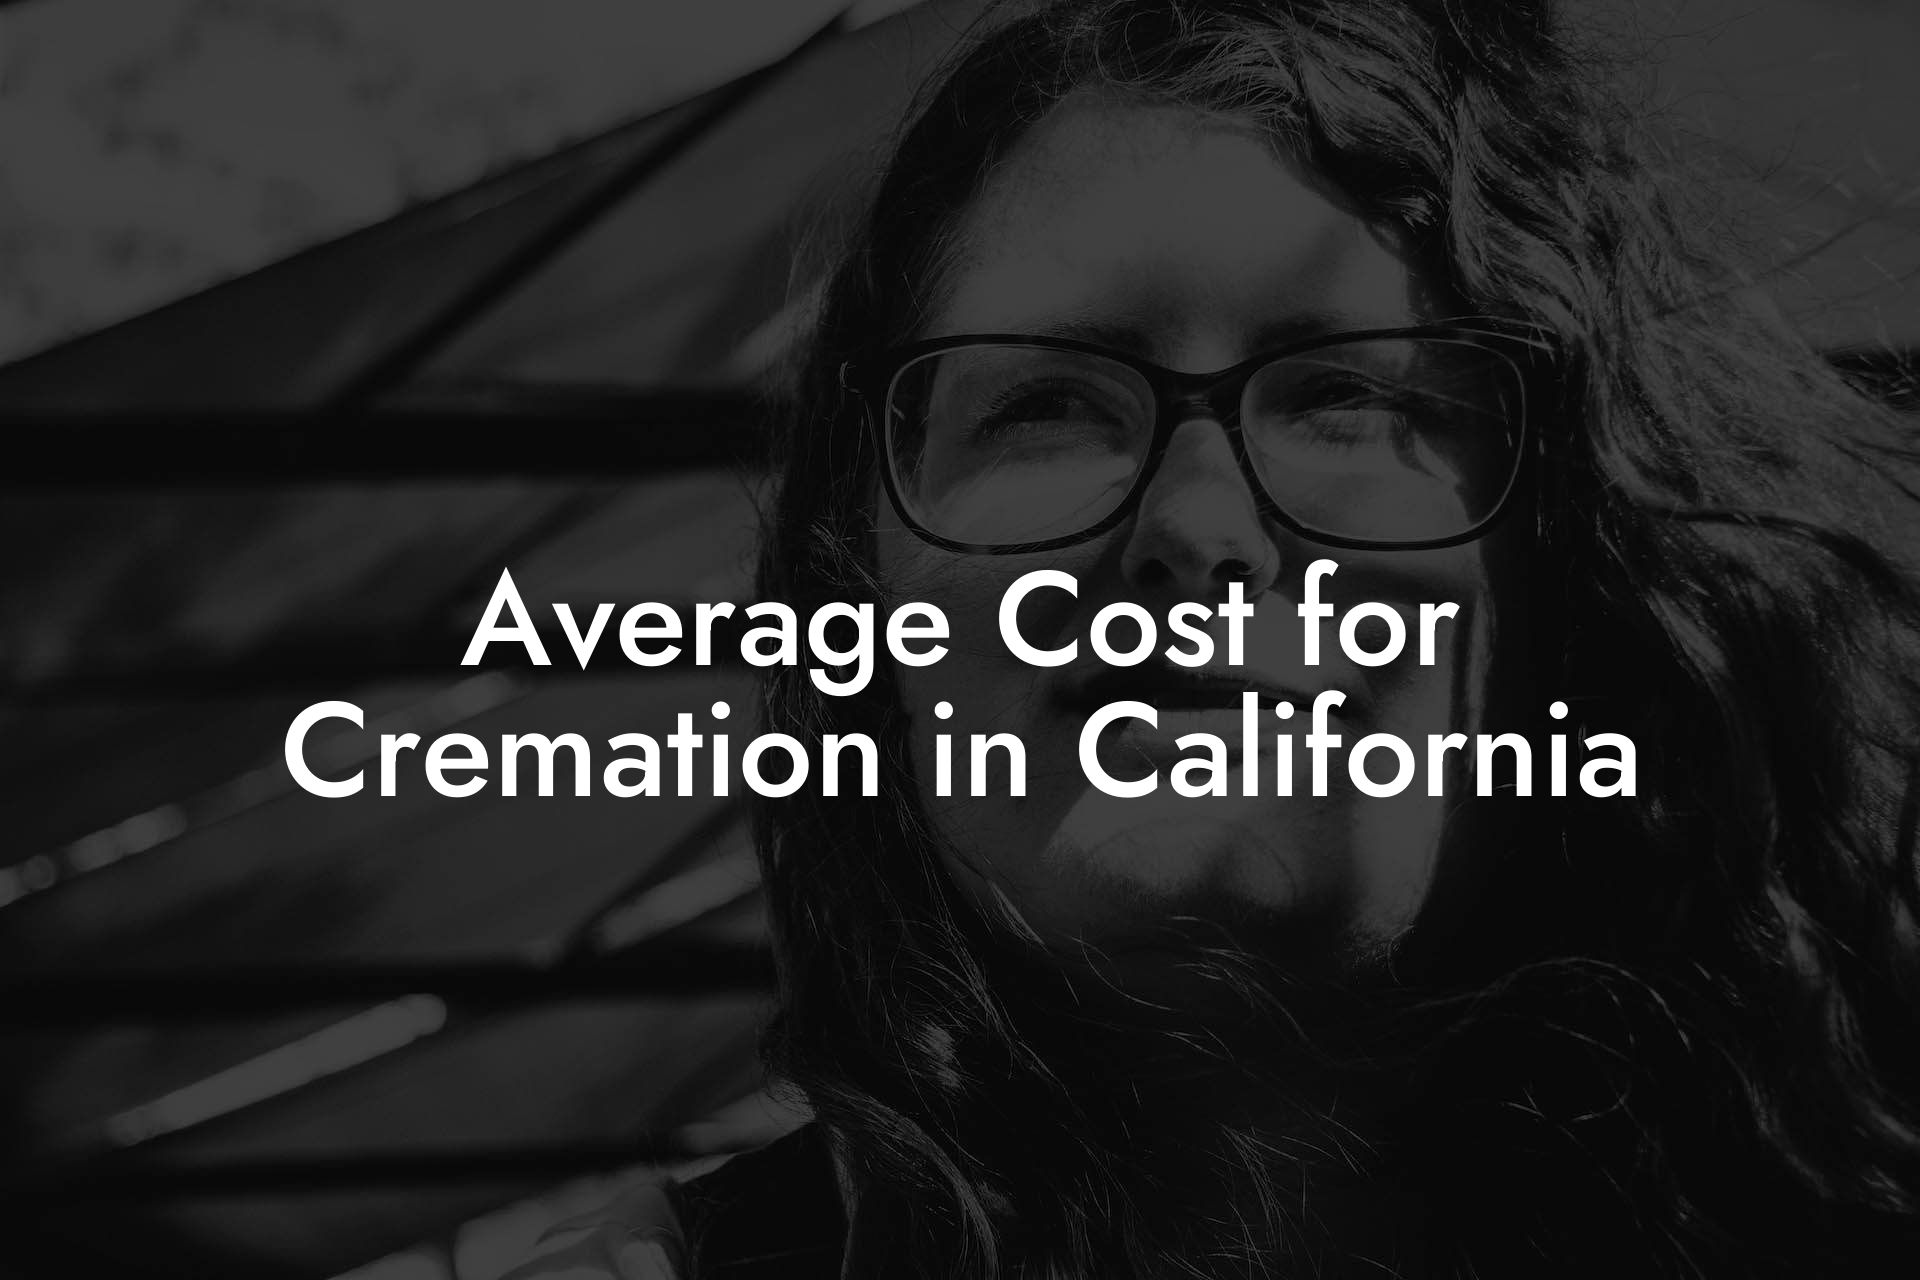 Average Cost for Cremation in California